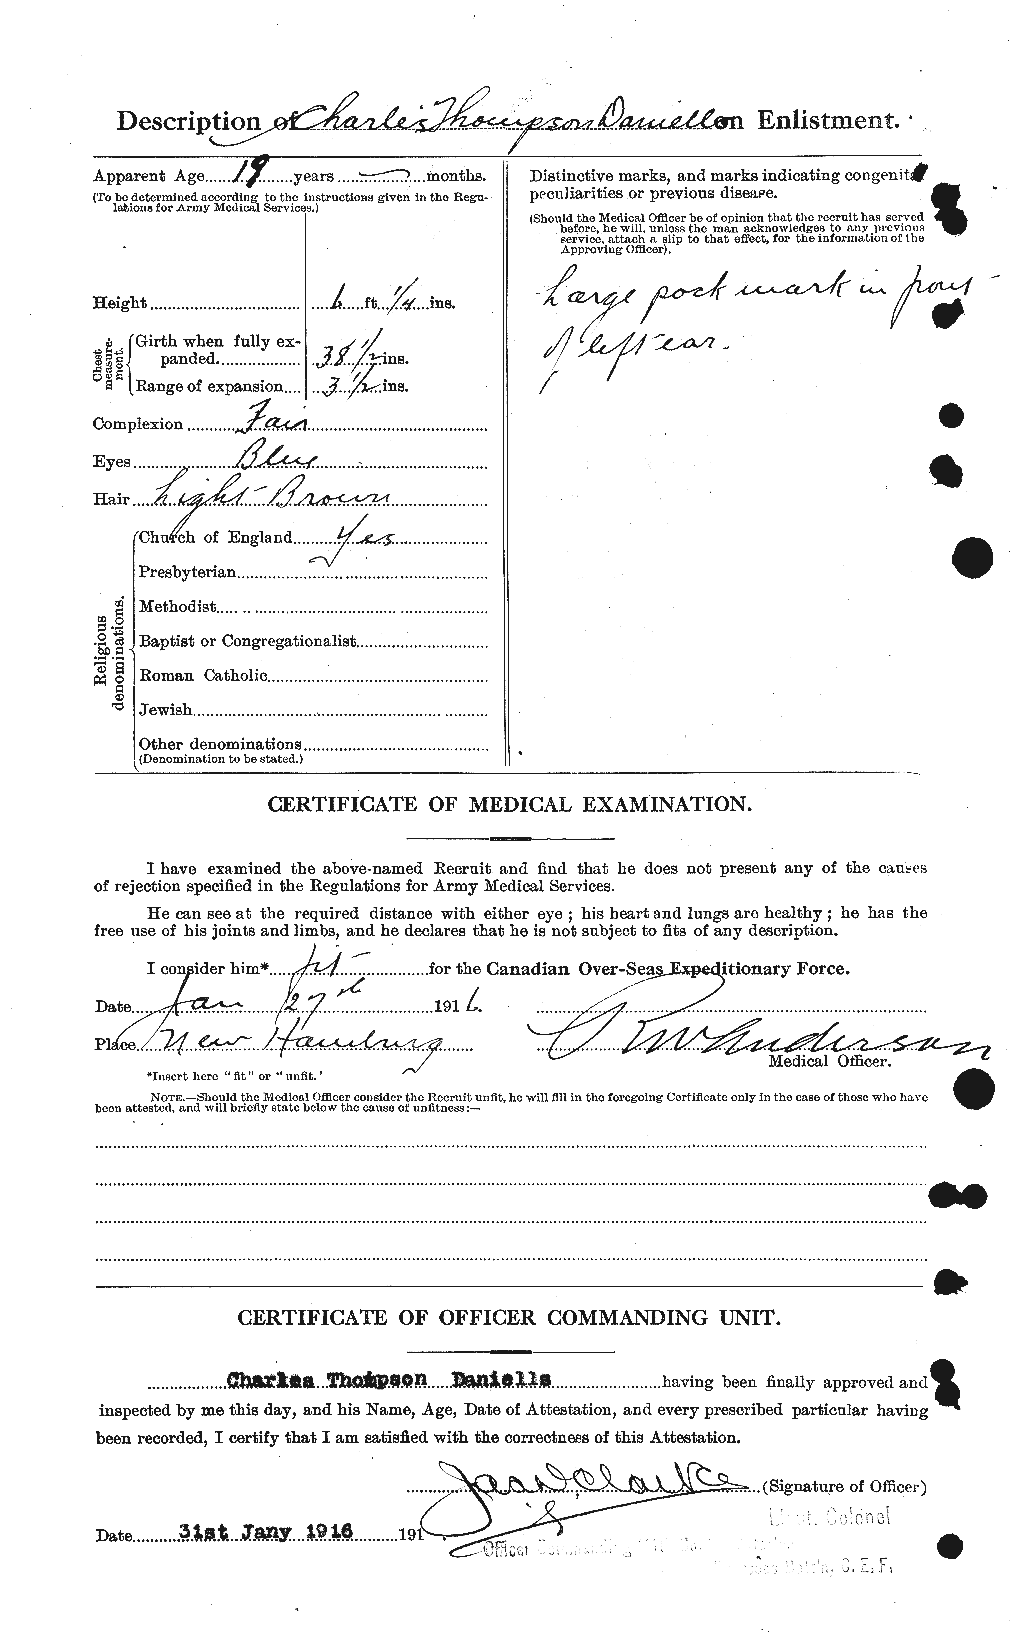 Personnel Records of the First World War - CEF 279554b